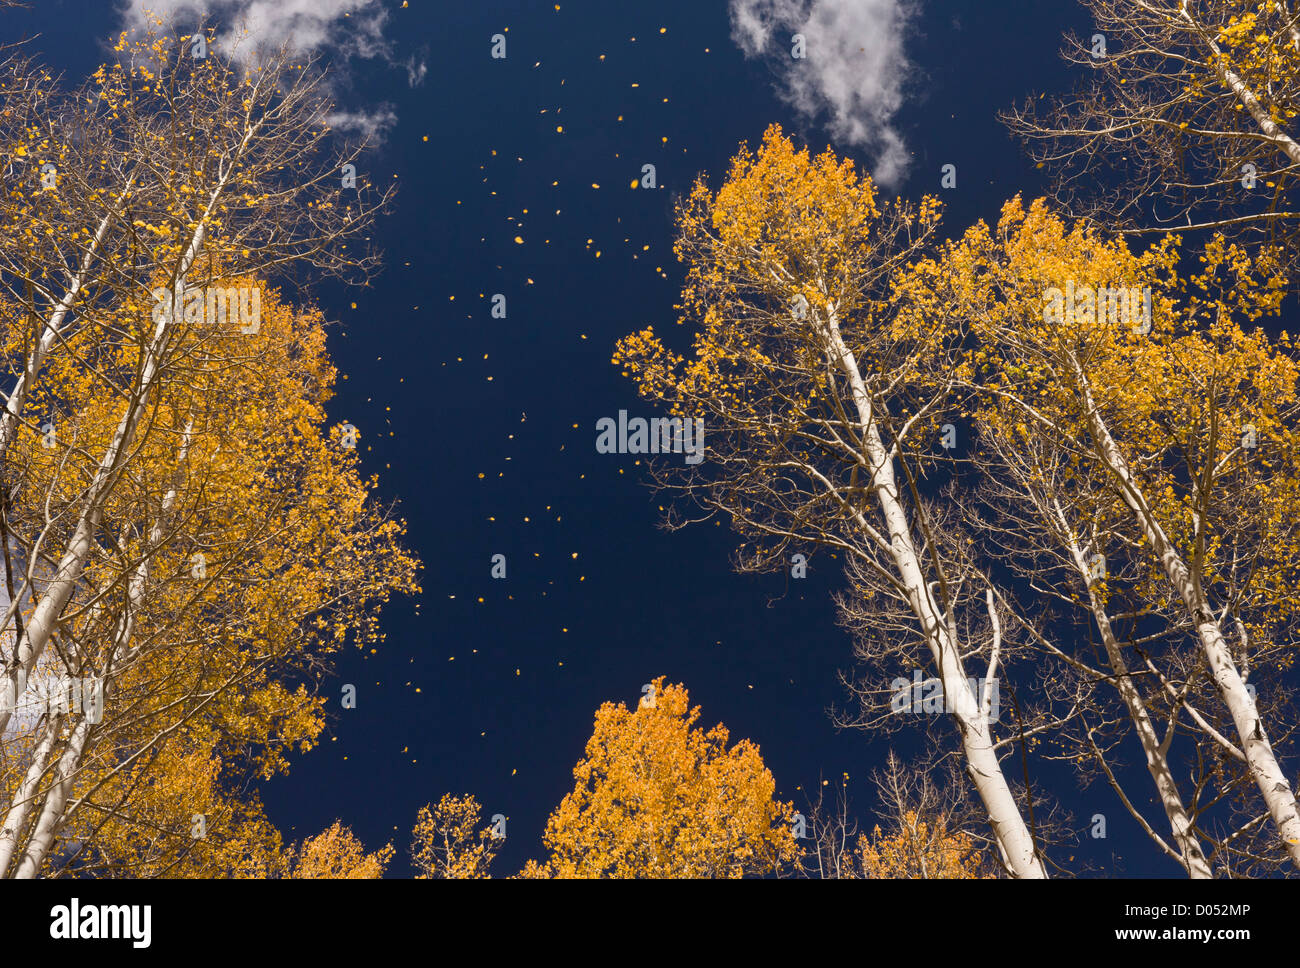 Leaves falling in autumn (fall), from Aspen trees (Populus tremuloides) in the San Juan Mountains, Colorado, USA Stock Photo